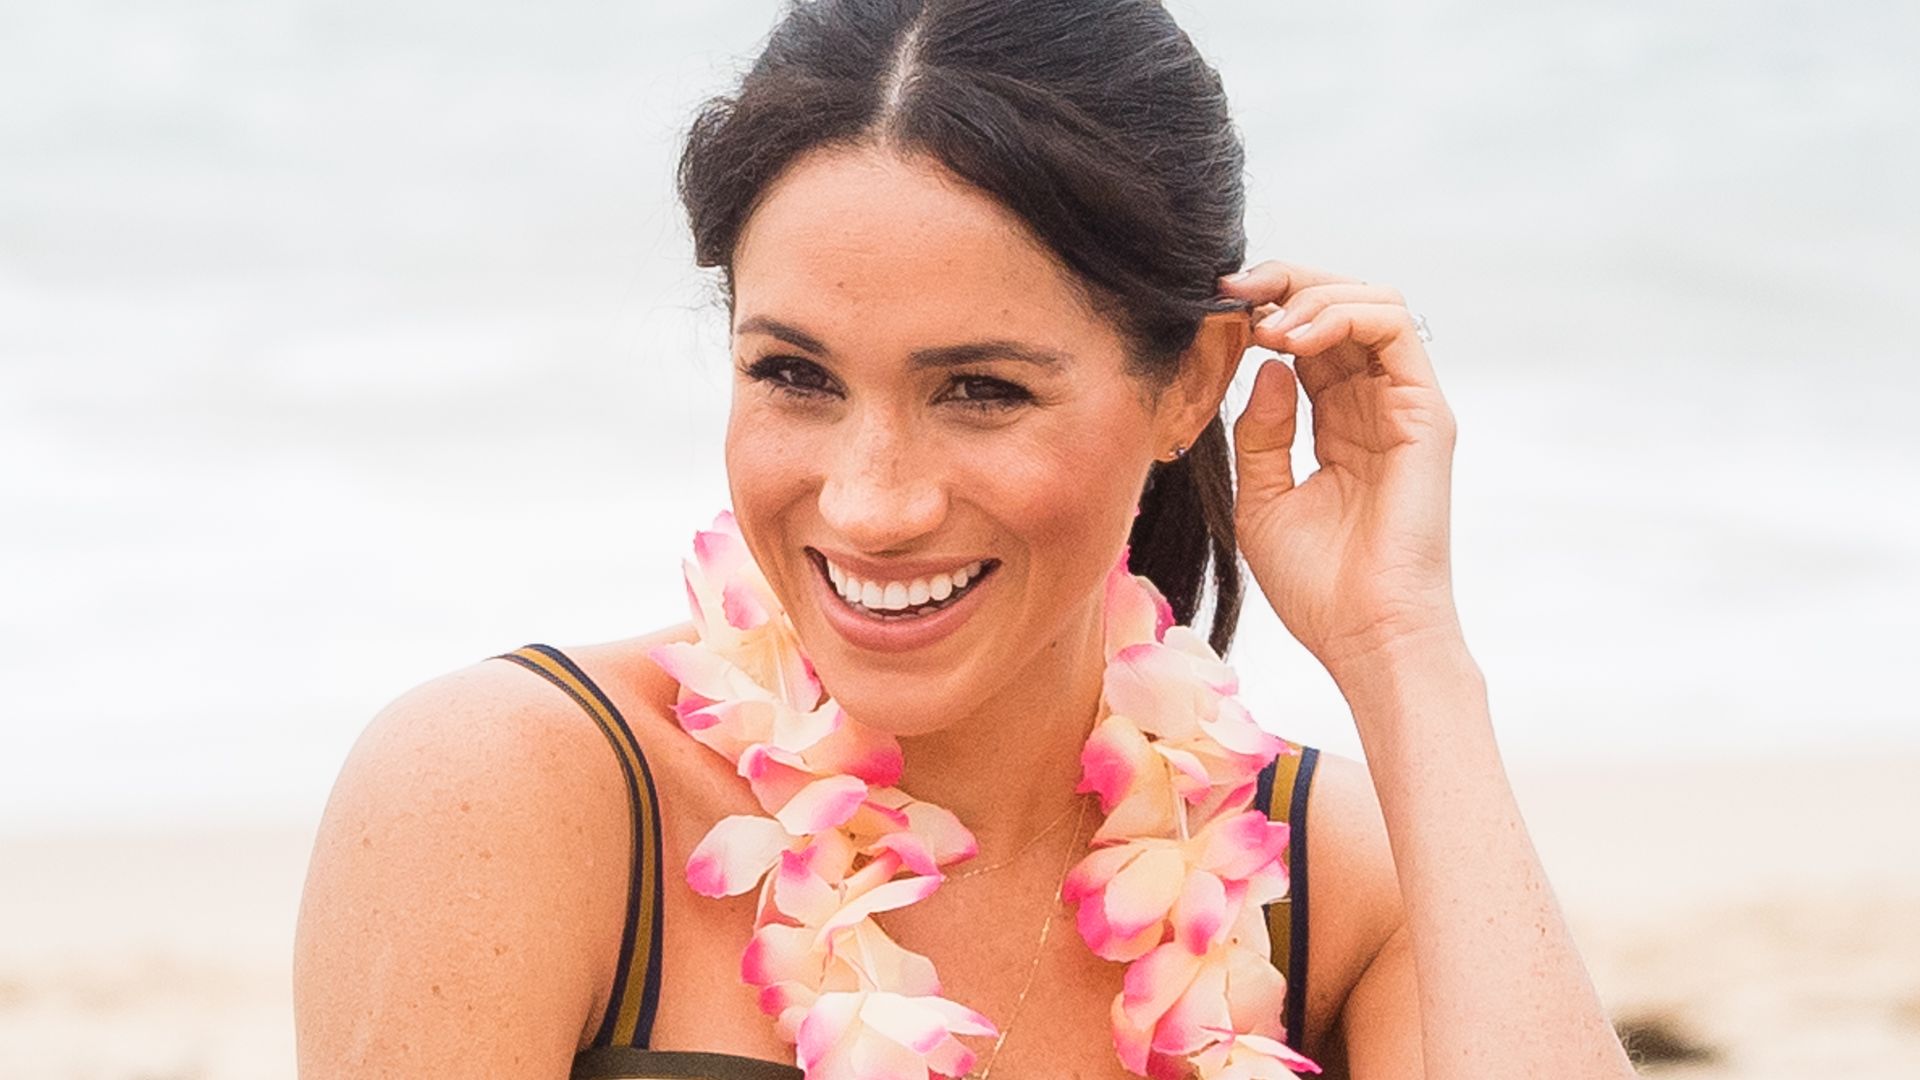 Meghan, Duchess of Sussex visits Bondi beach on October 19, 2018 in Sydney, Australia. The Duke and Duchess of Sussex are on their official 16-day Autumn tour visiting cities in Australia, Fiji, Tonga and New Zealand.